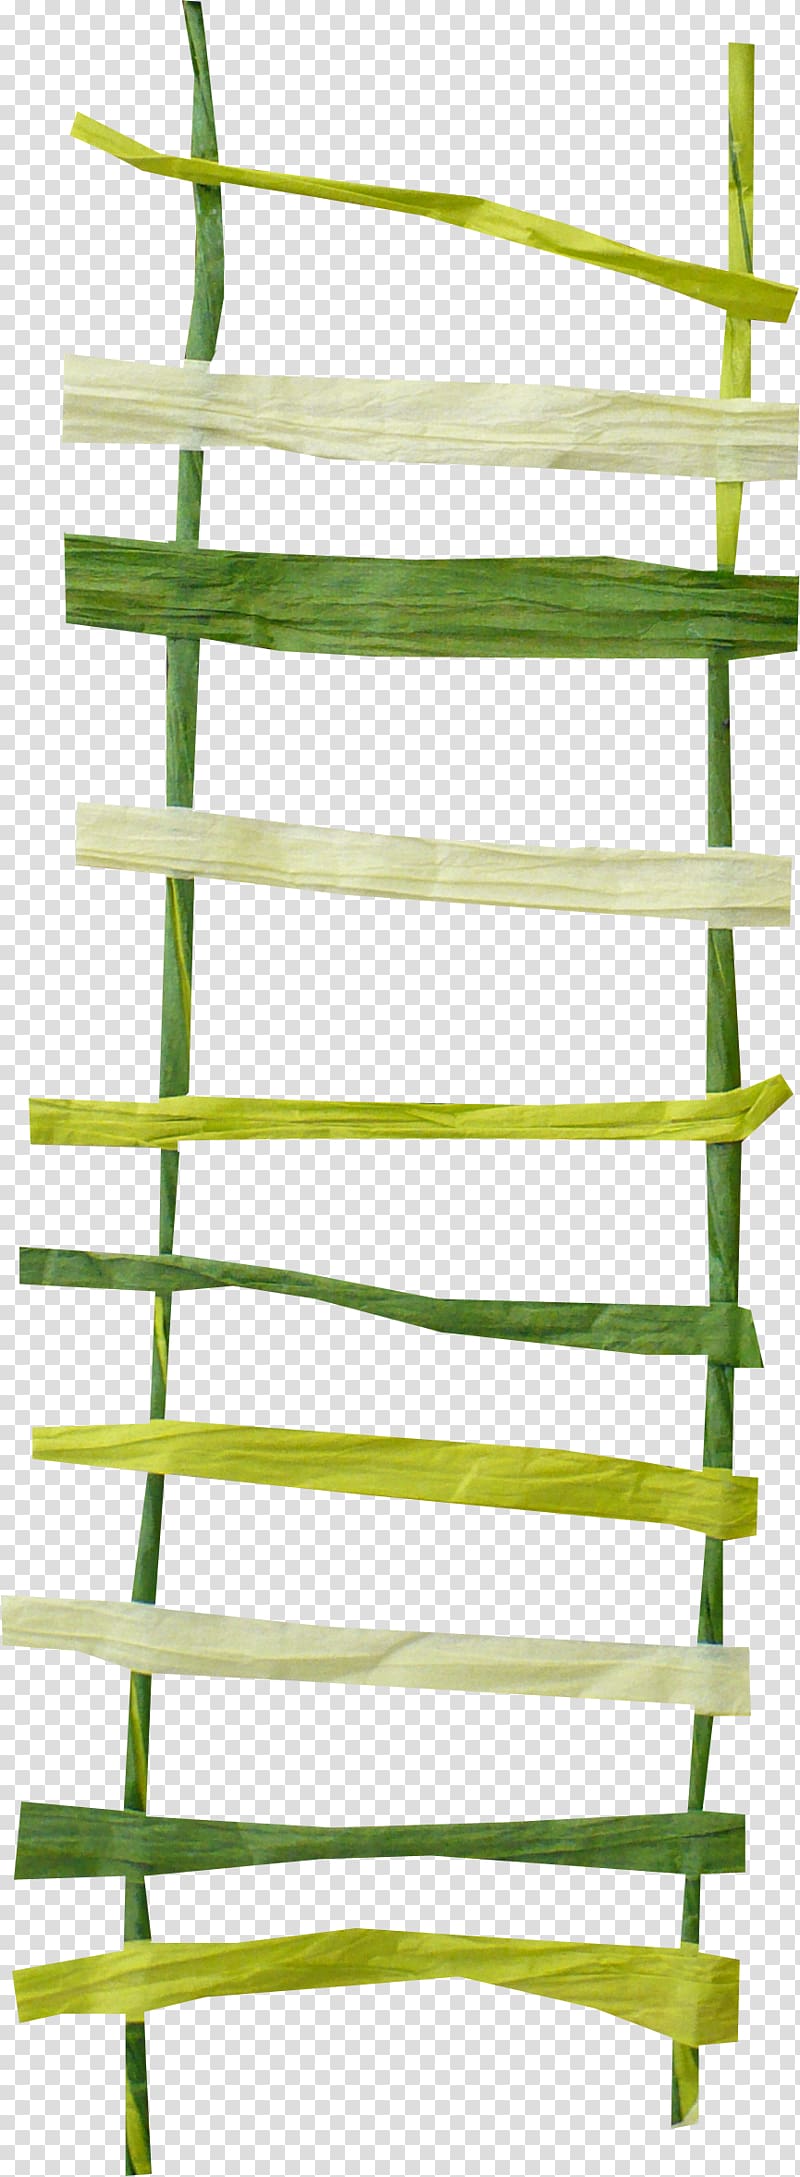 Ladder Resource Computer file, Pretty creative ladder transparent background PNG clipart